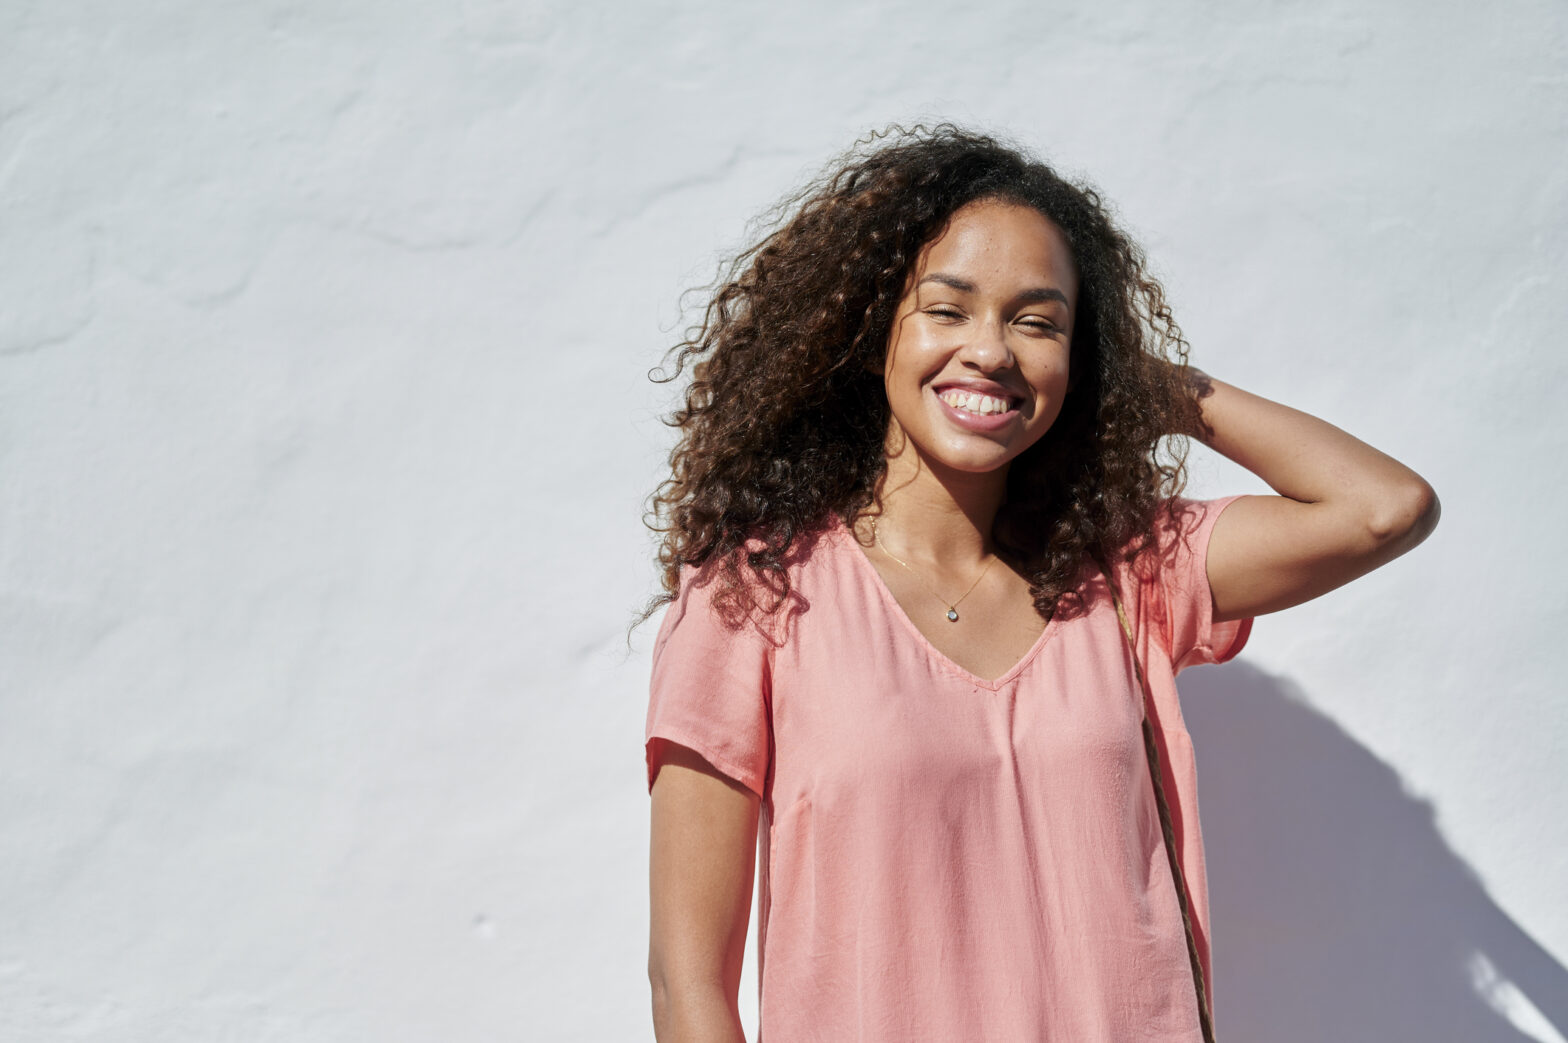 Portrait of smiling woman with curly hair in front of white wall